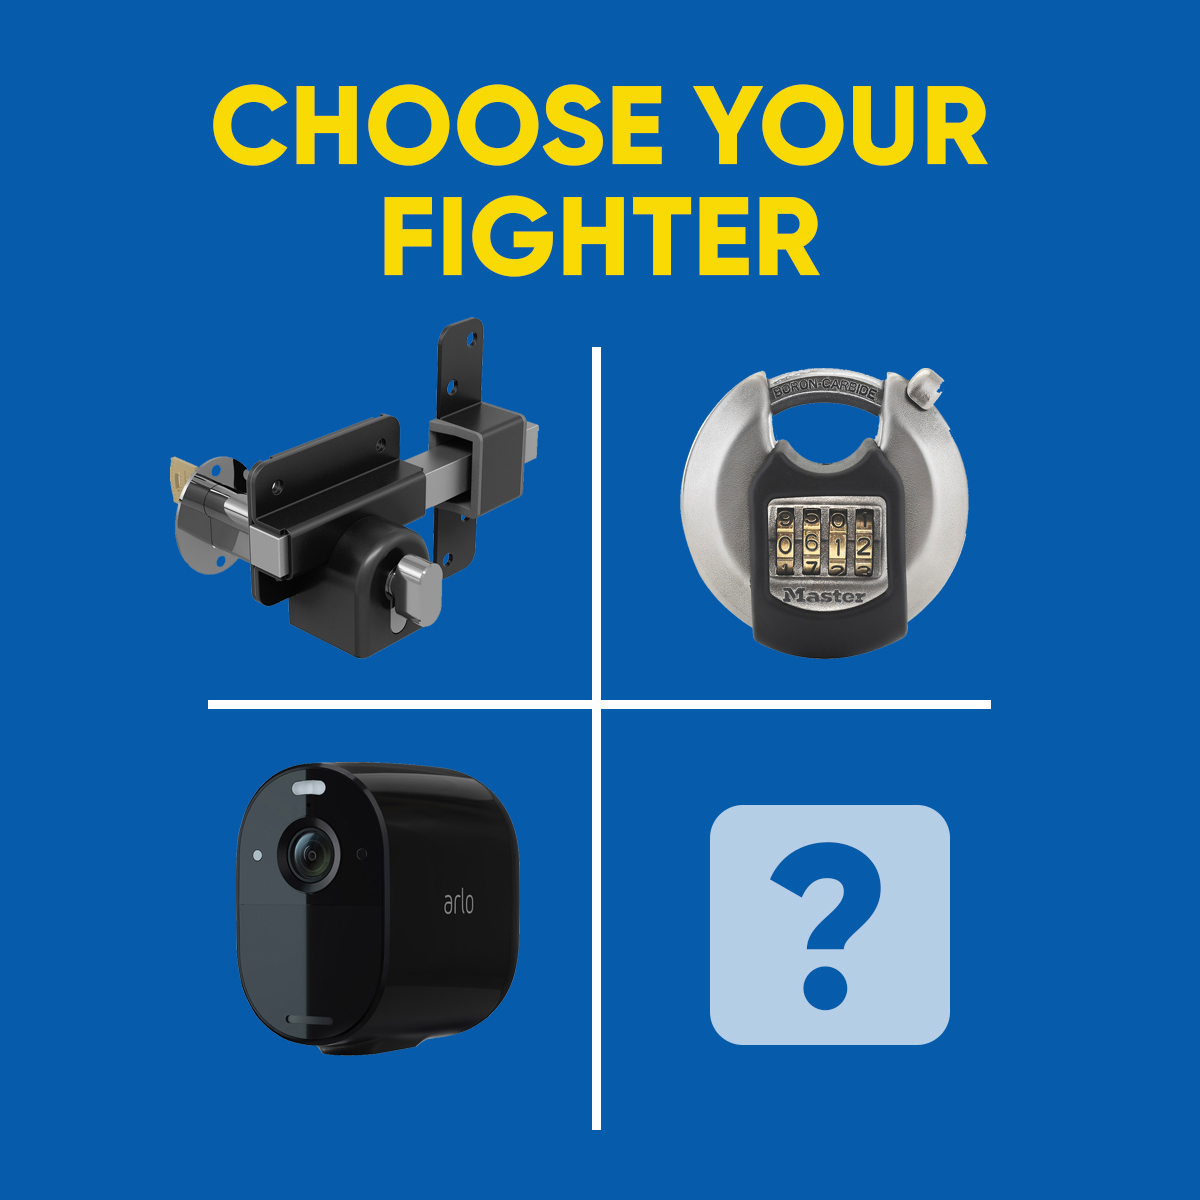 This time, we've got a security scenario for you. What are you choosing to help secure your home? A - GateMate single locking bolt B - Master Lock combination padlock C - Arlo spotlight security camera D - The mystery box What would you hope to be in your mystery box? 🤔